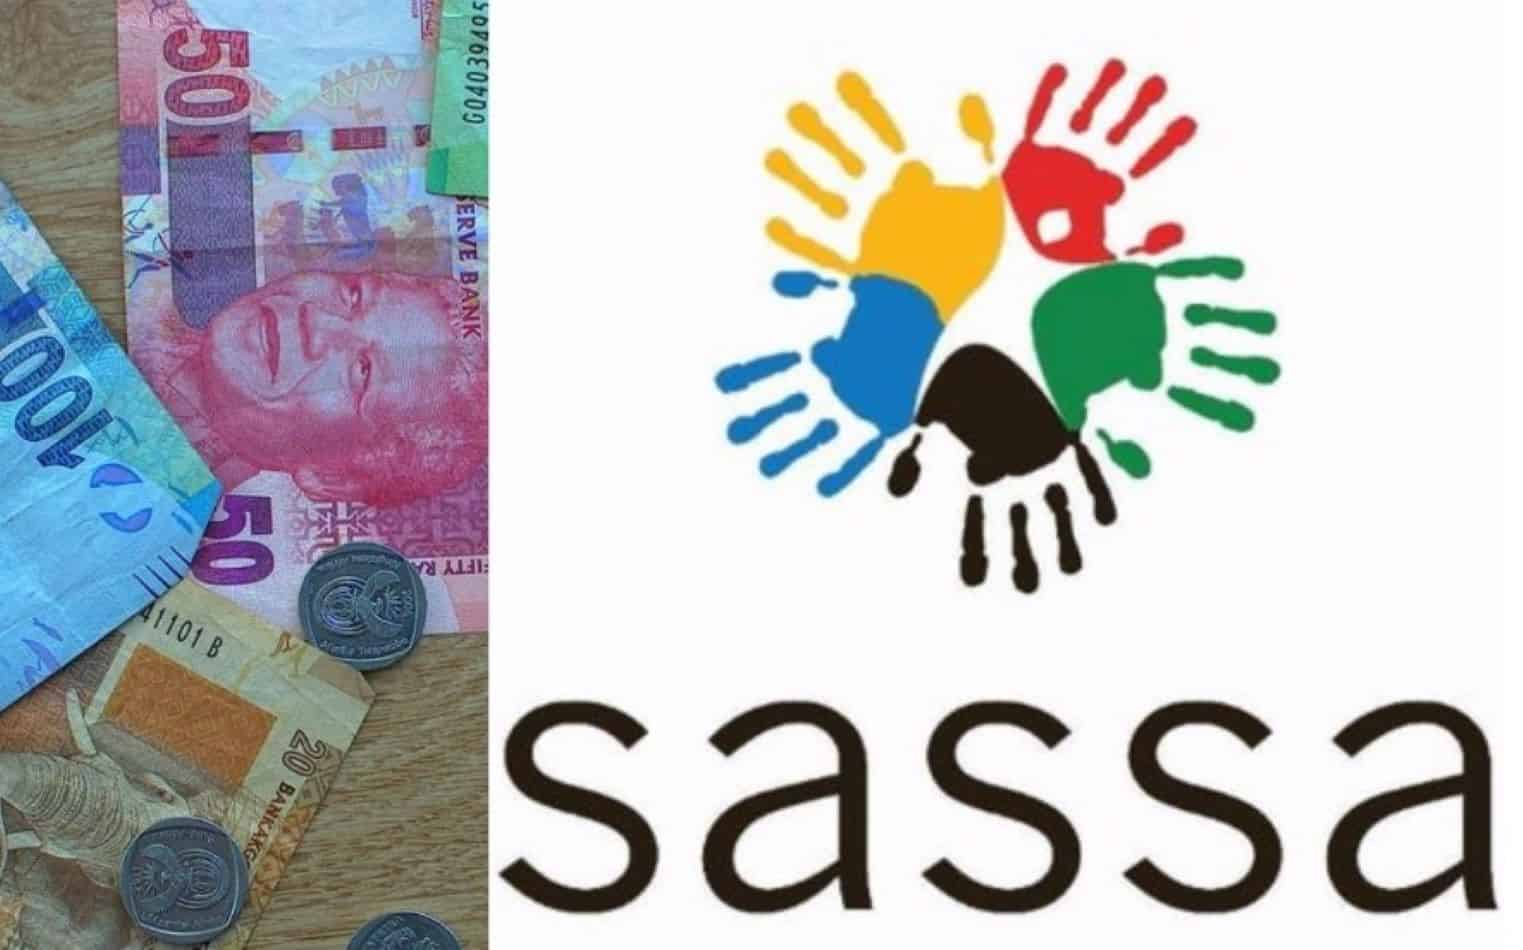 Sassa Grant Payment Dates For September - Including Covid-19 Social Relief of Distress Grant